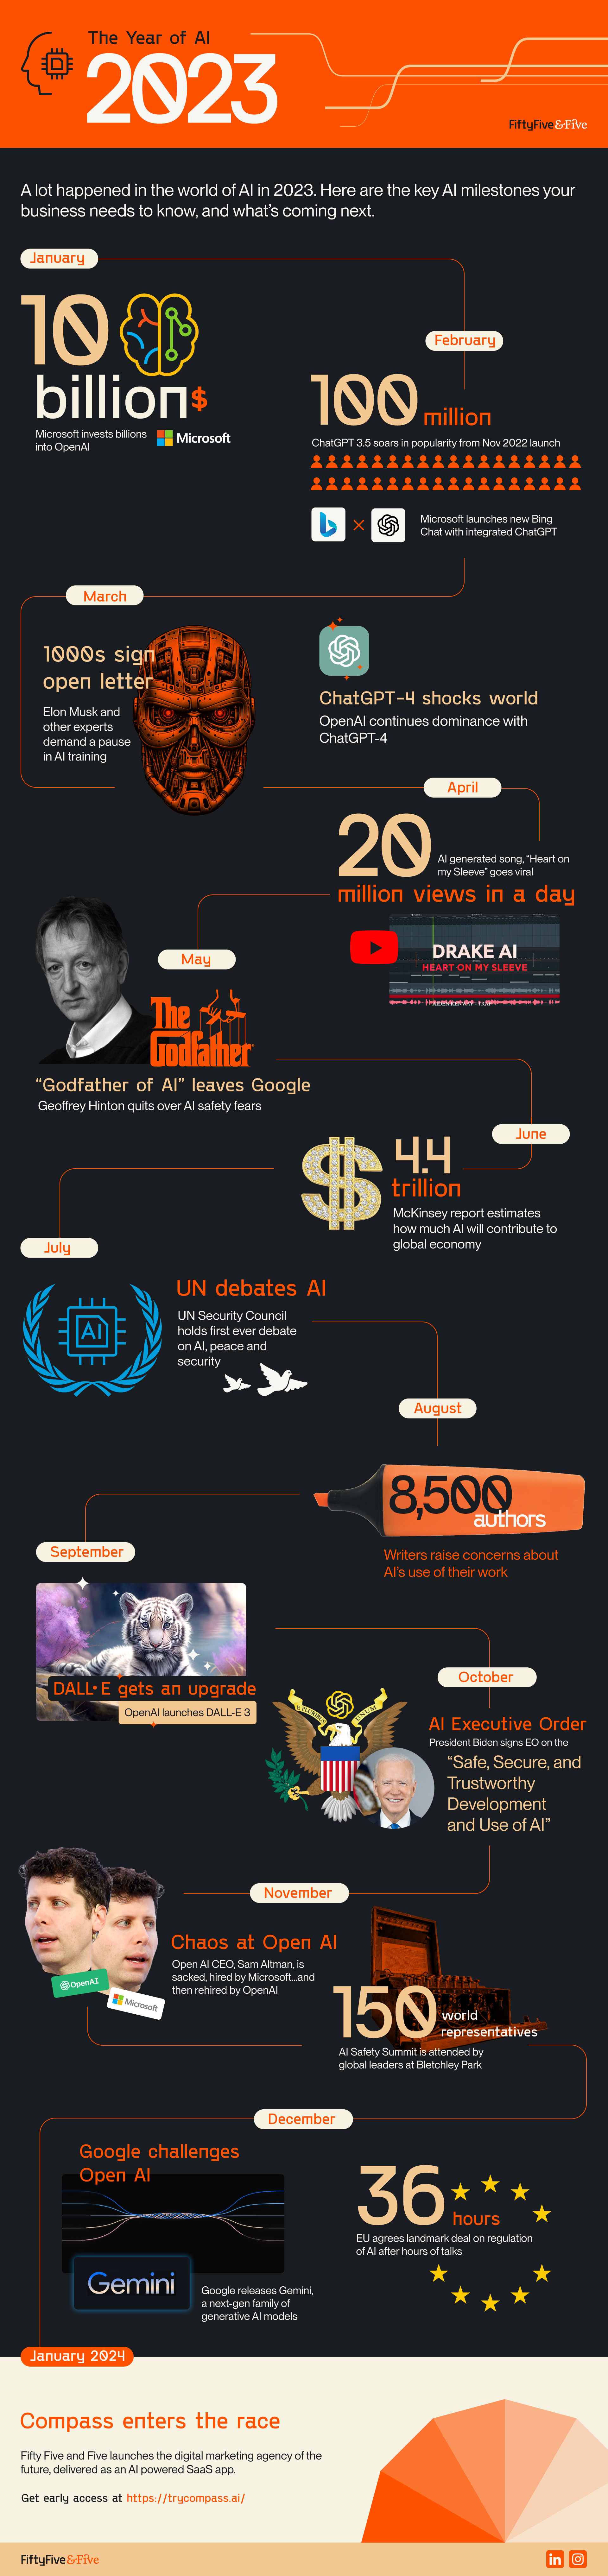 Infographic: Key AI milestones from 2023 your business needs to know.